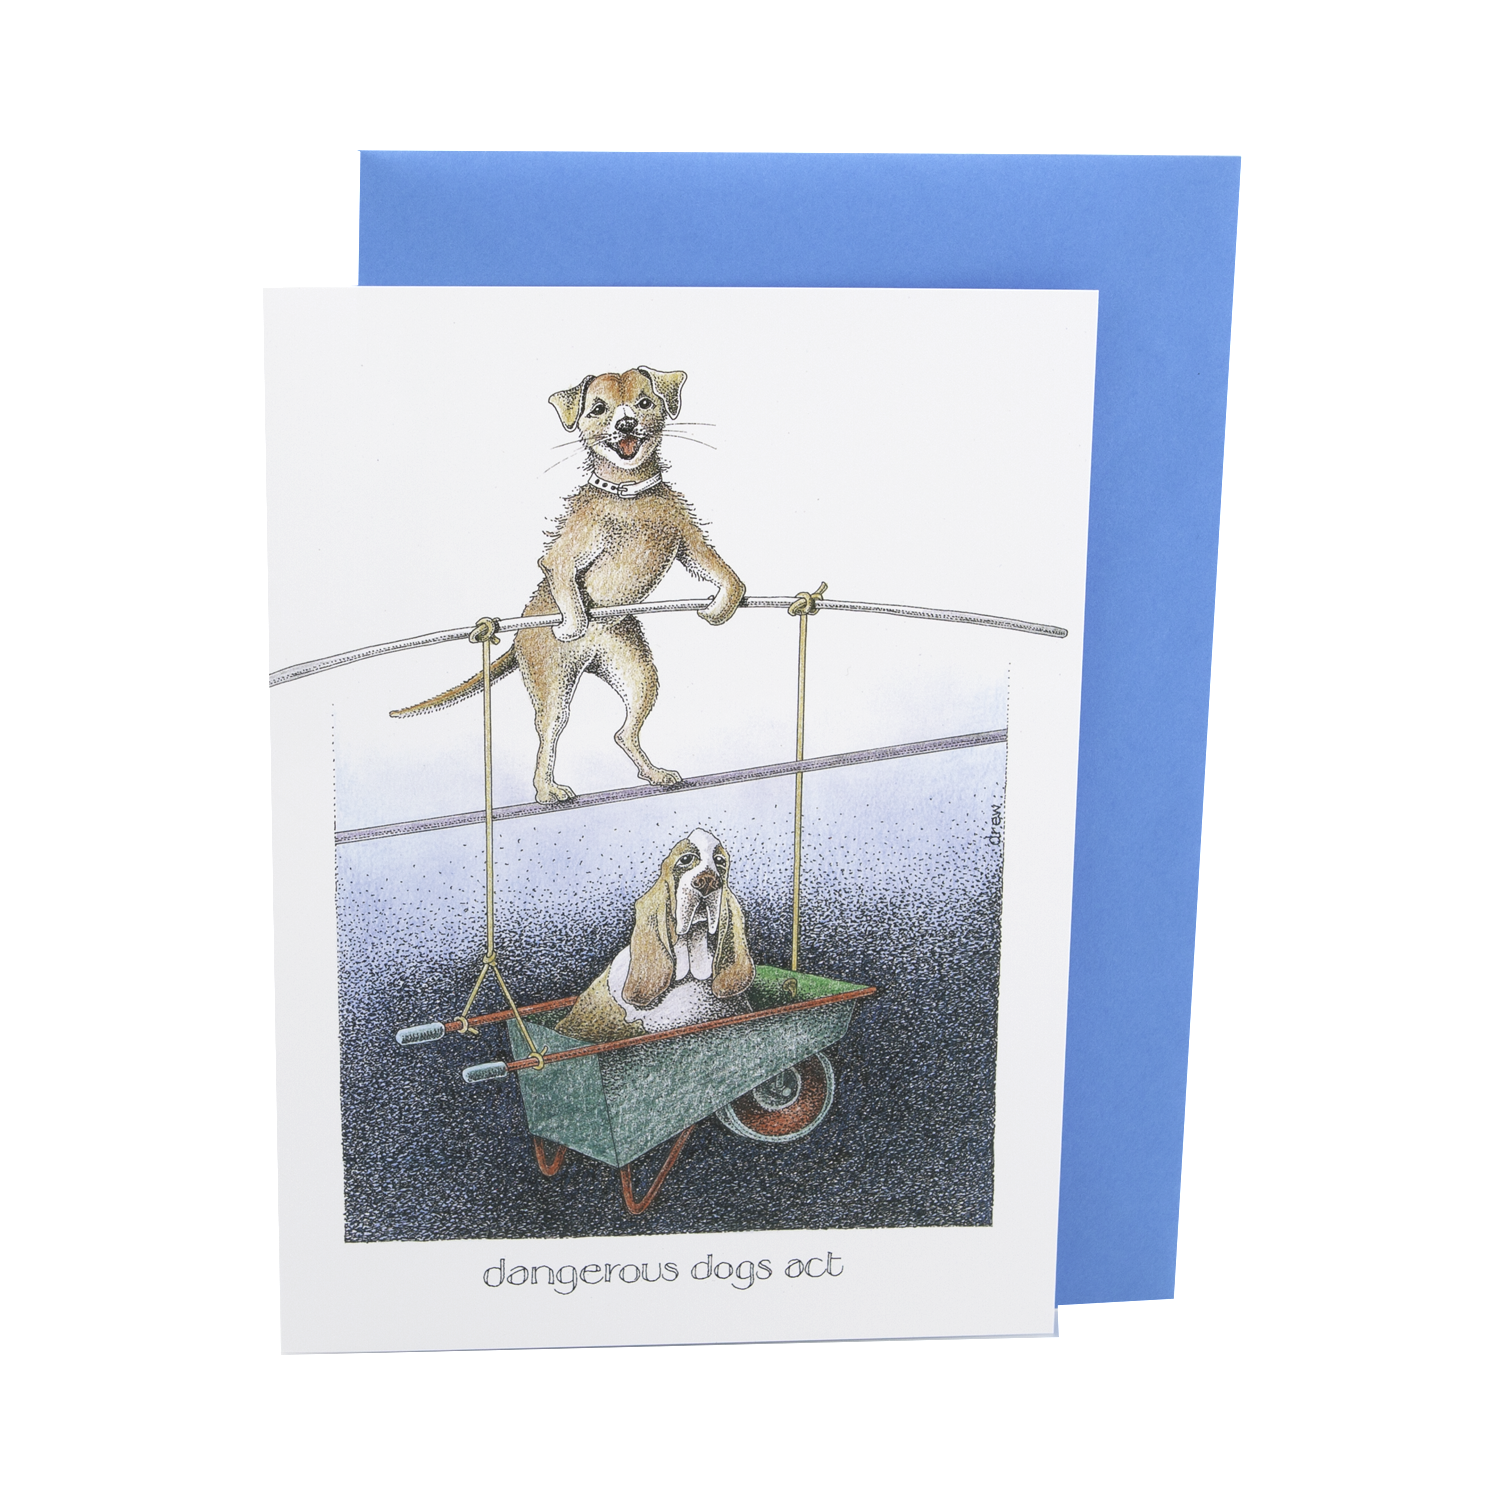 DogKrazy.Gifts – Simon Drew Dangerous Dogs Act, Humorous card featuring a Terrier and a Basset Hound on a high wire.